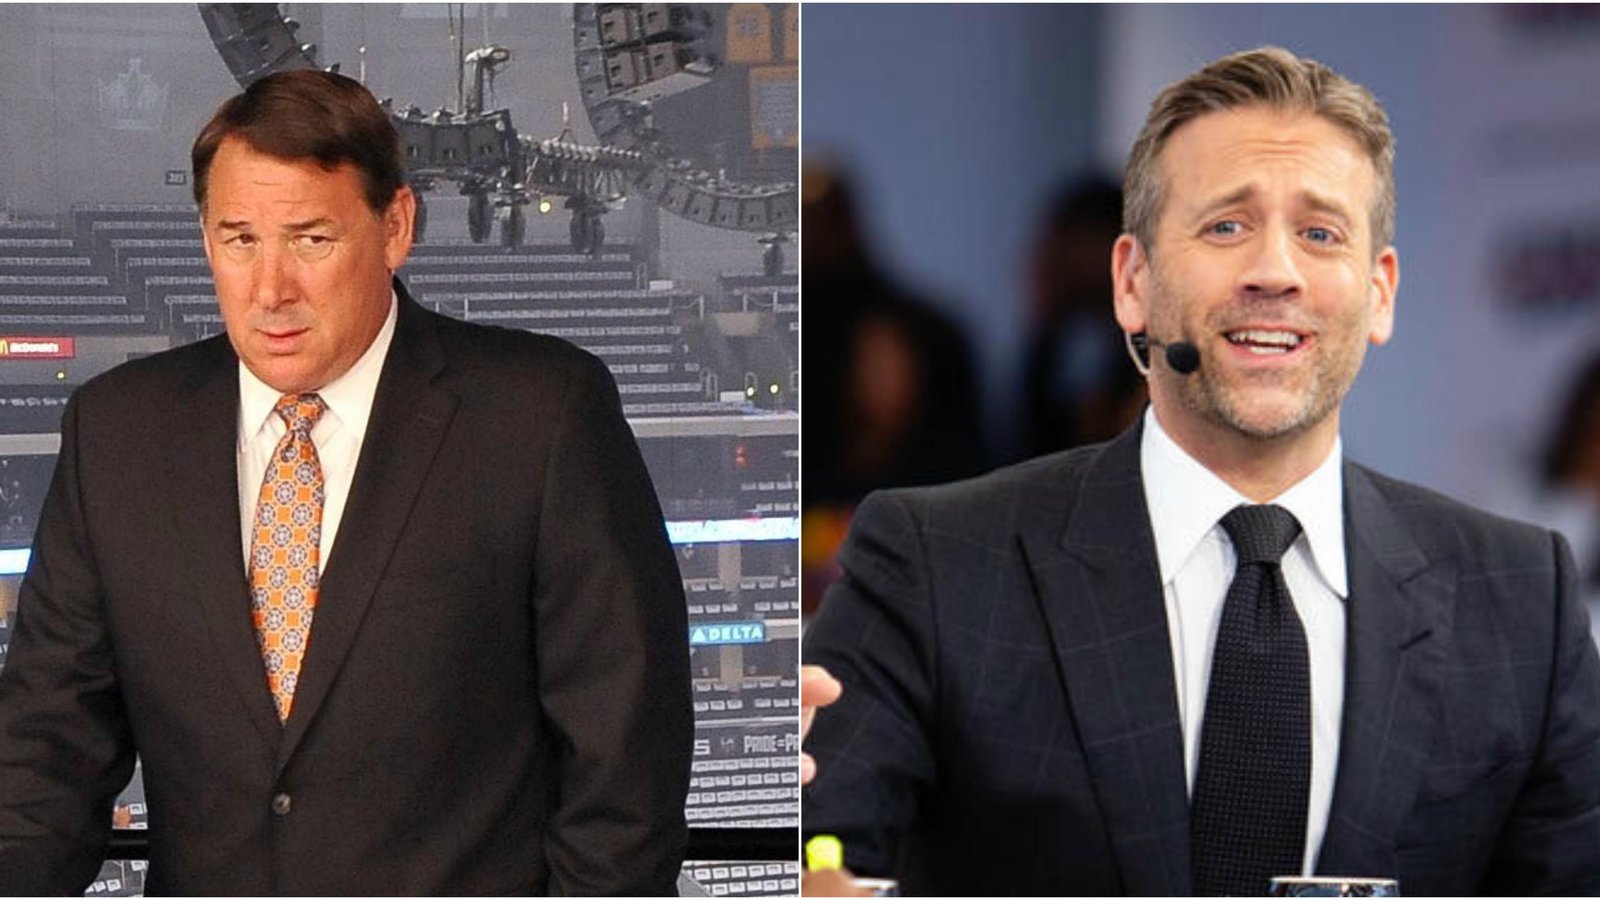 Max Kellerman roasted by Mike Milbury after claiming “no one really cares about hockey.”